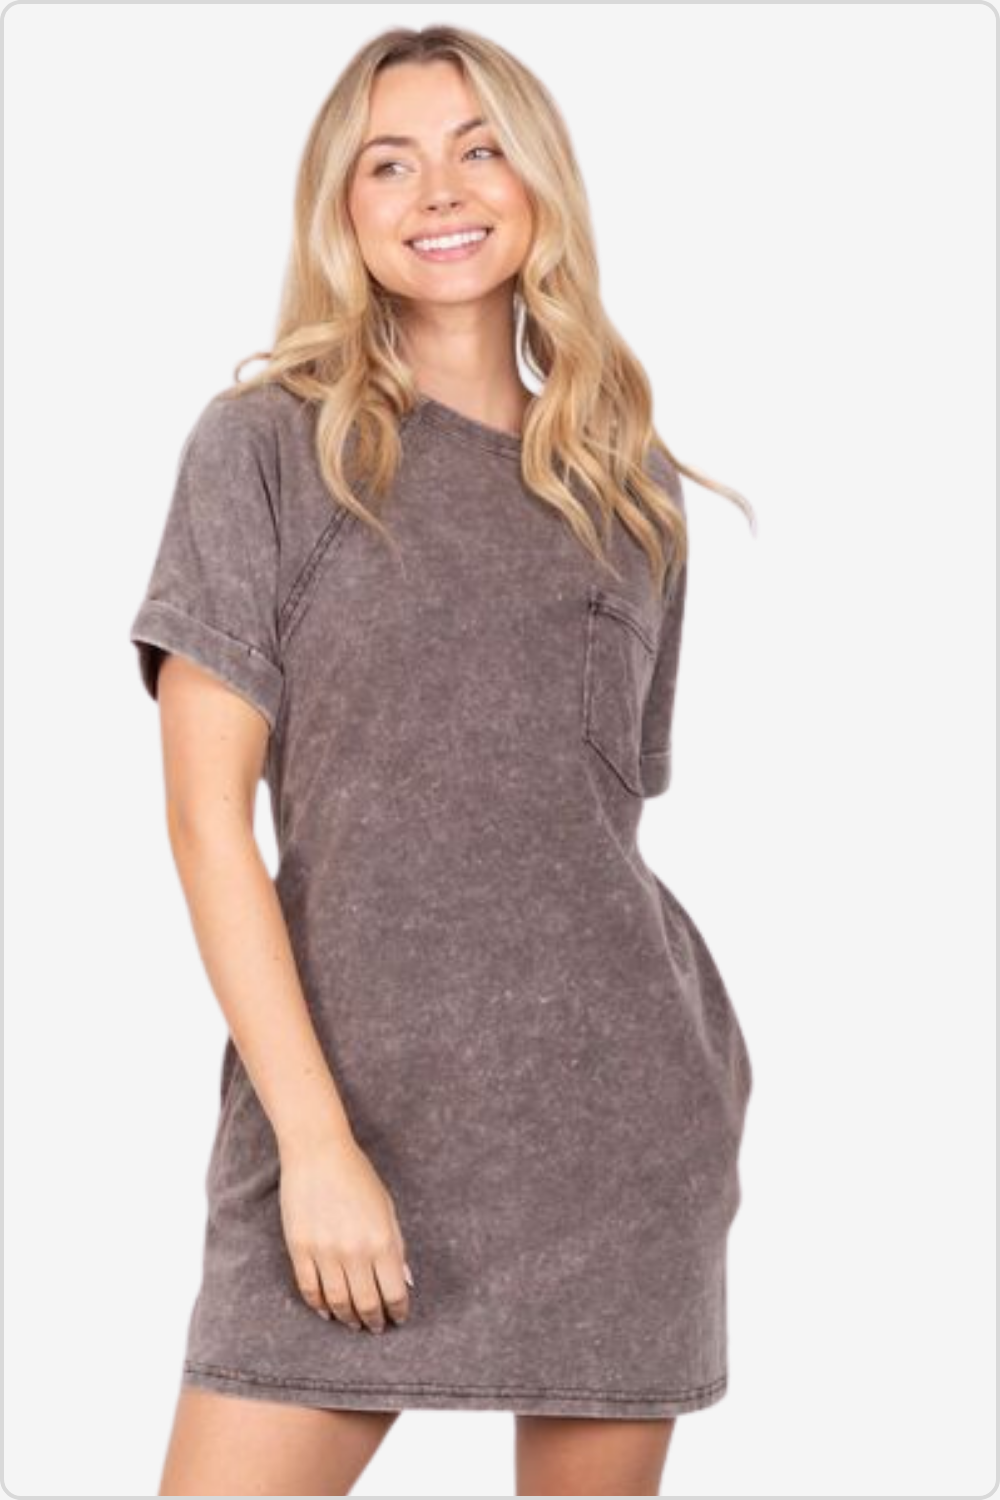 Casual Yet Stylish Mini Dress Perfect for Everyday Wear